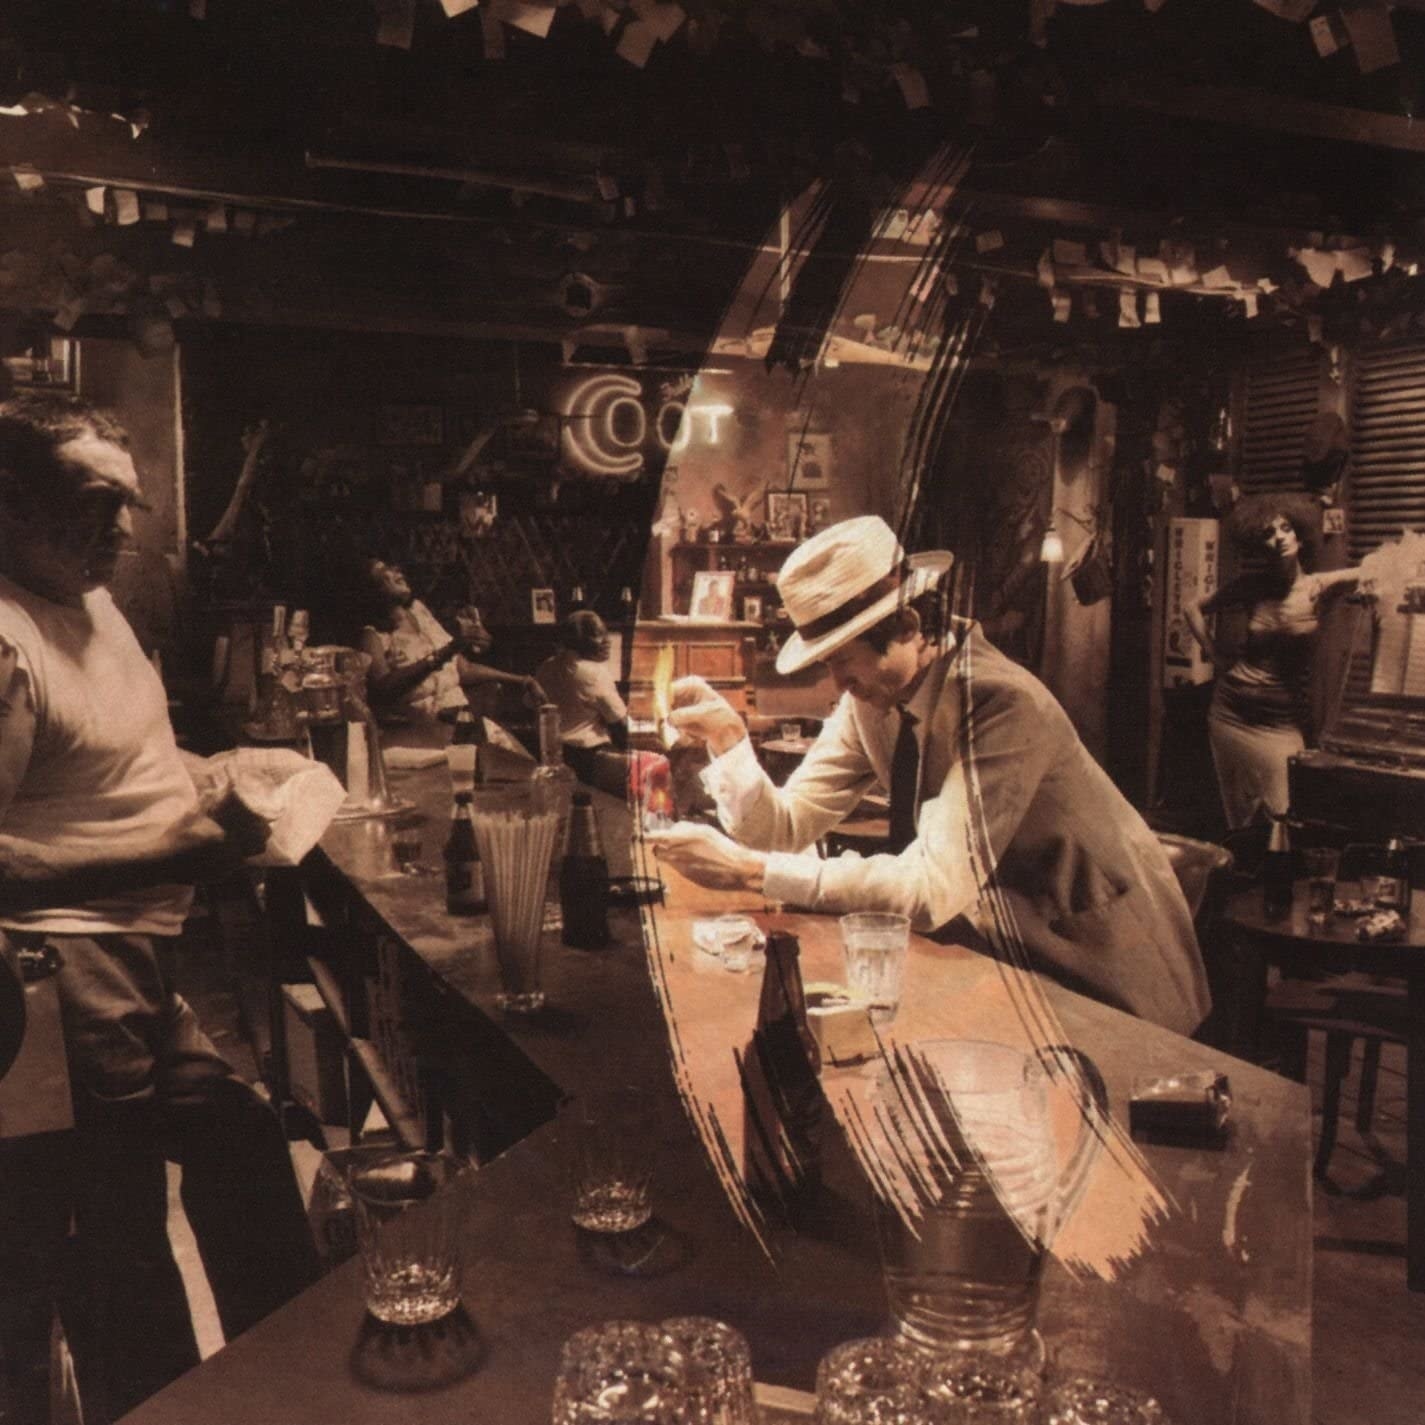 One of the covers of Led Zeppelin&#x27;s album In Through the Out Door